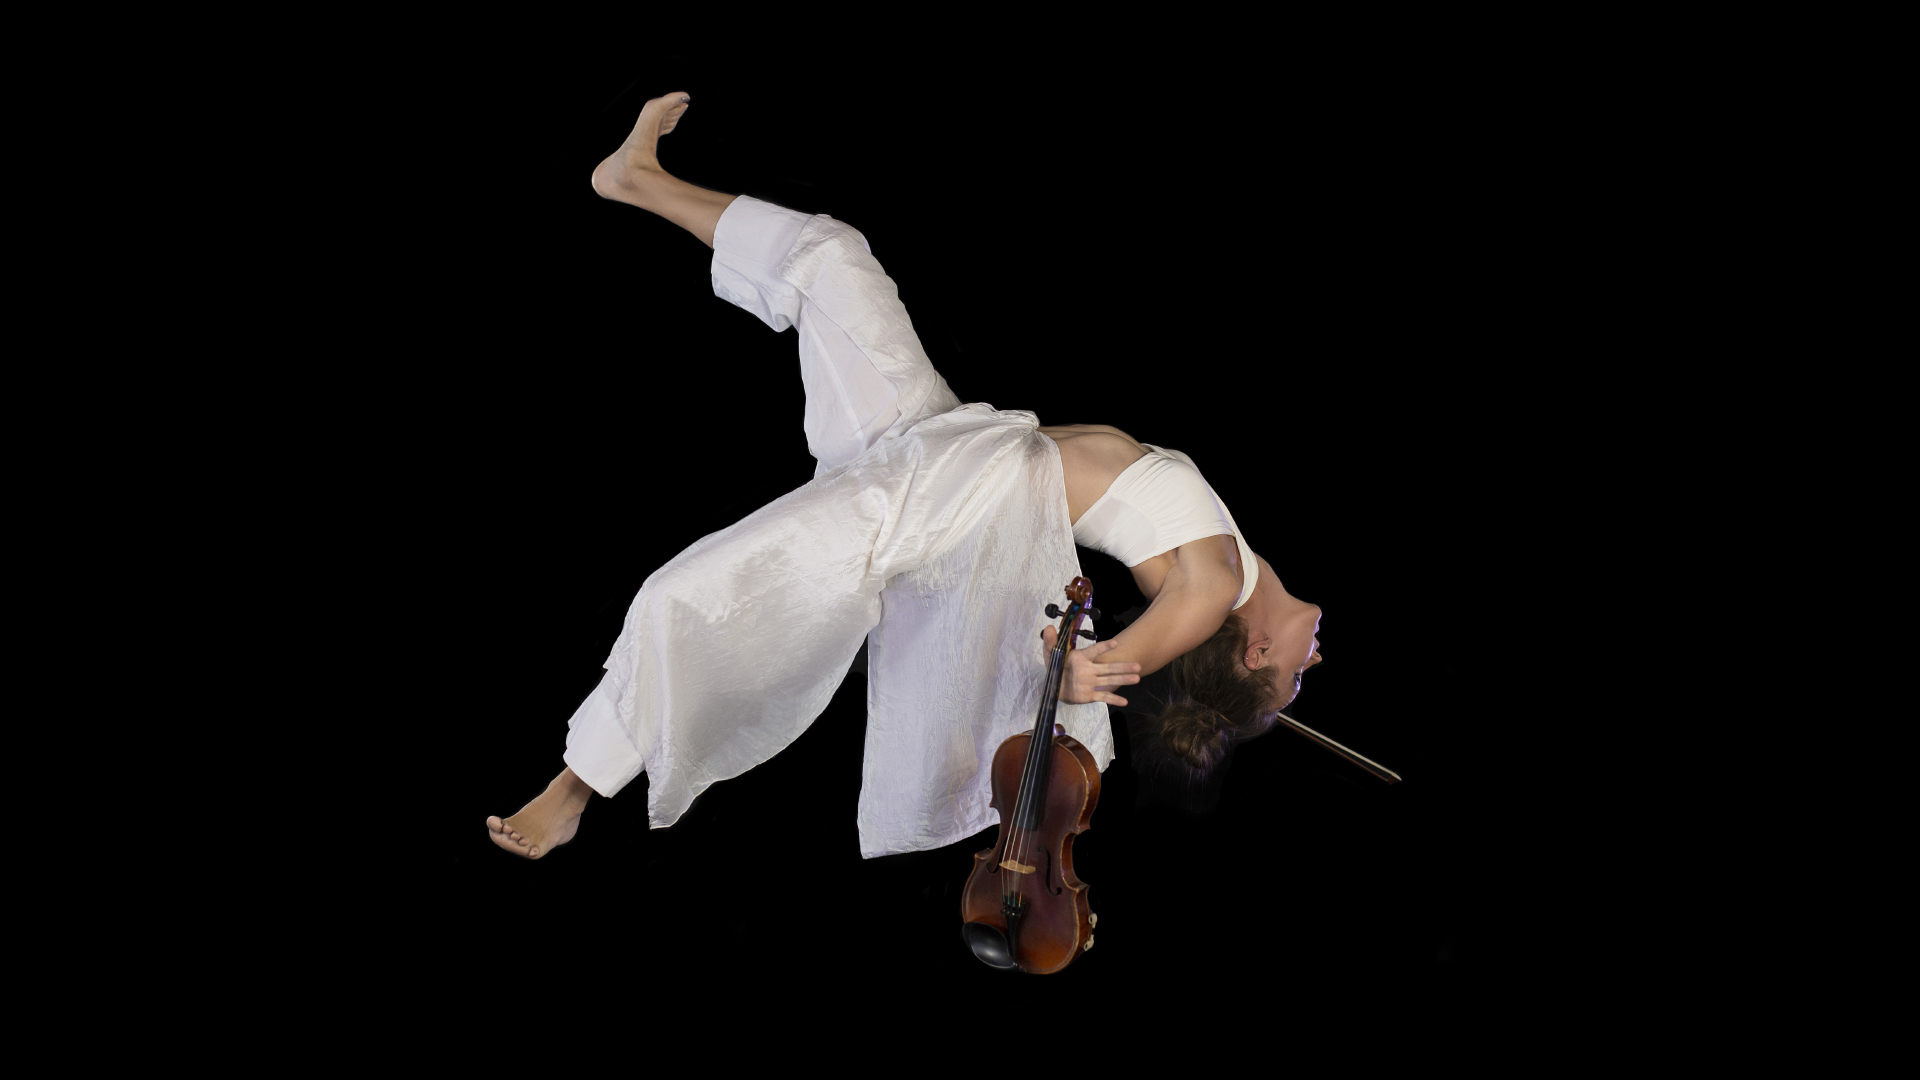 A person hangs upside down holding a violin.